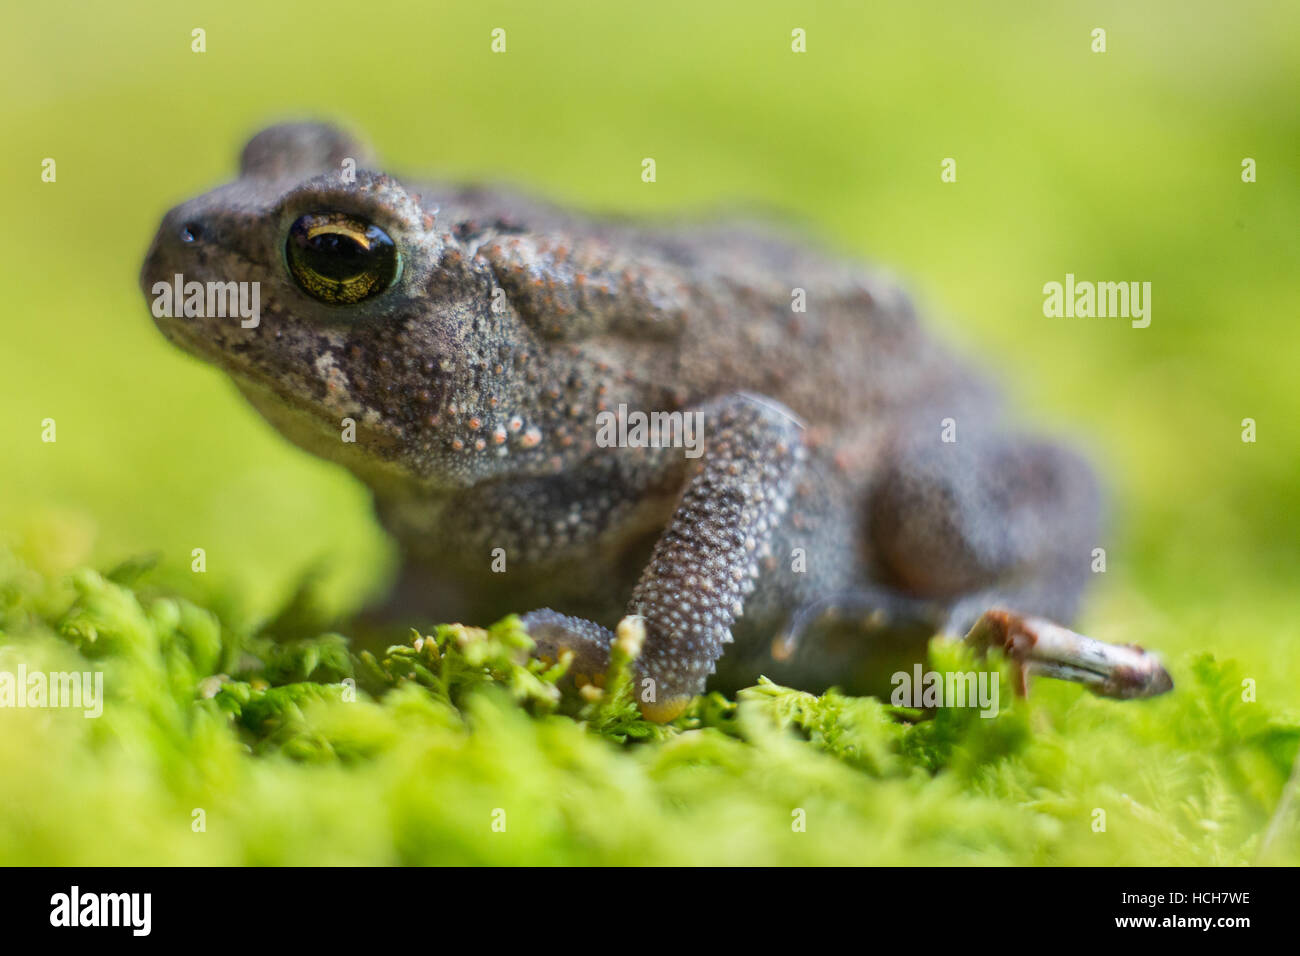 Baby Toad, Young Common Small Frog Sitting on Green Leaf Stock Image -  Image of animal, closeup: 187774691